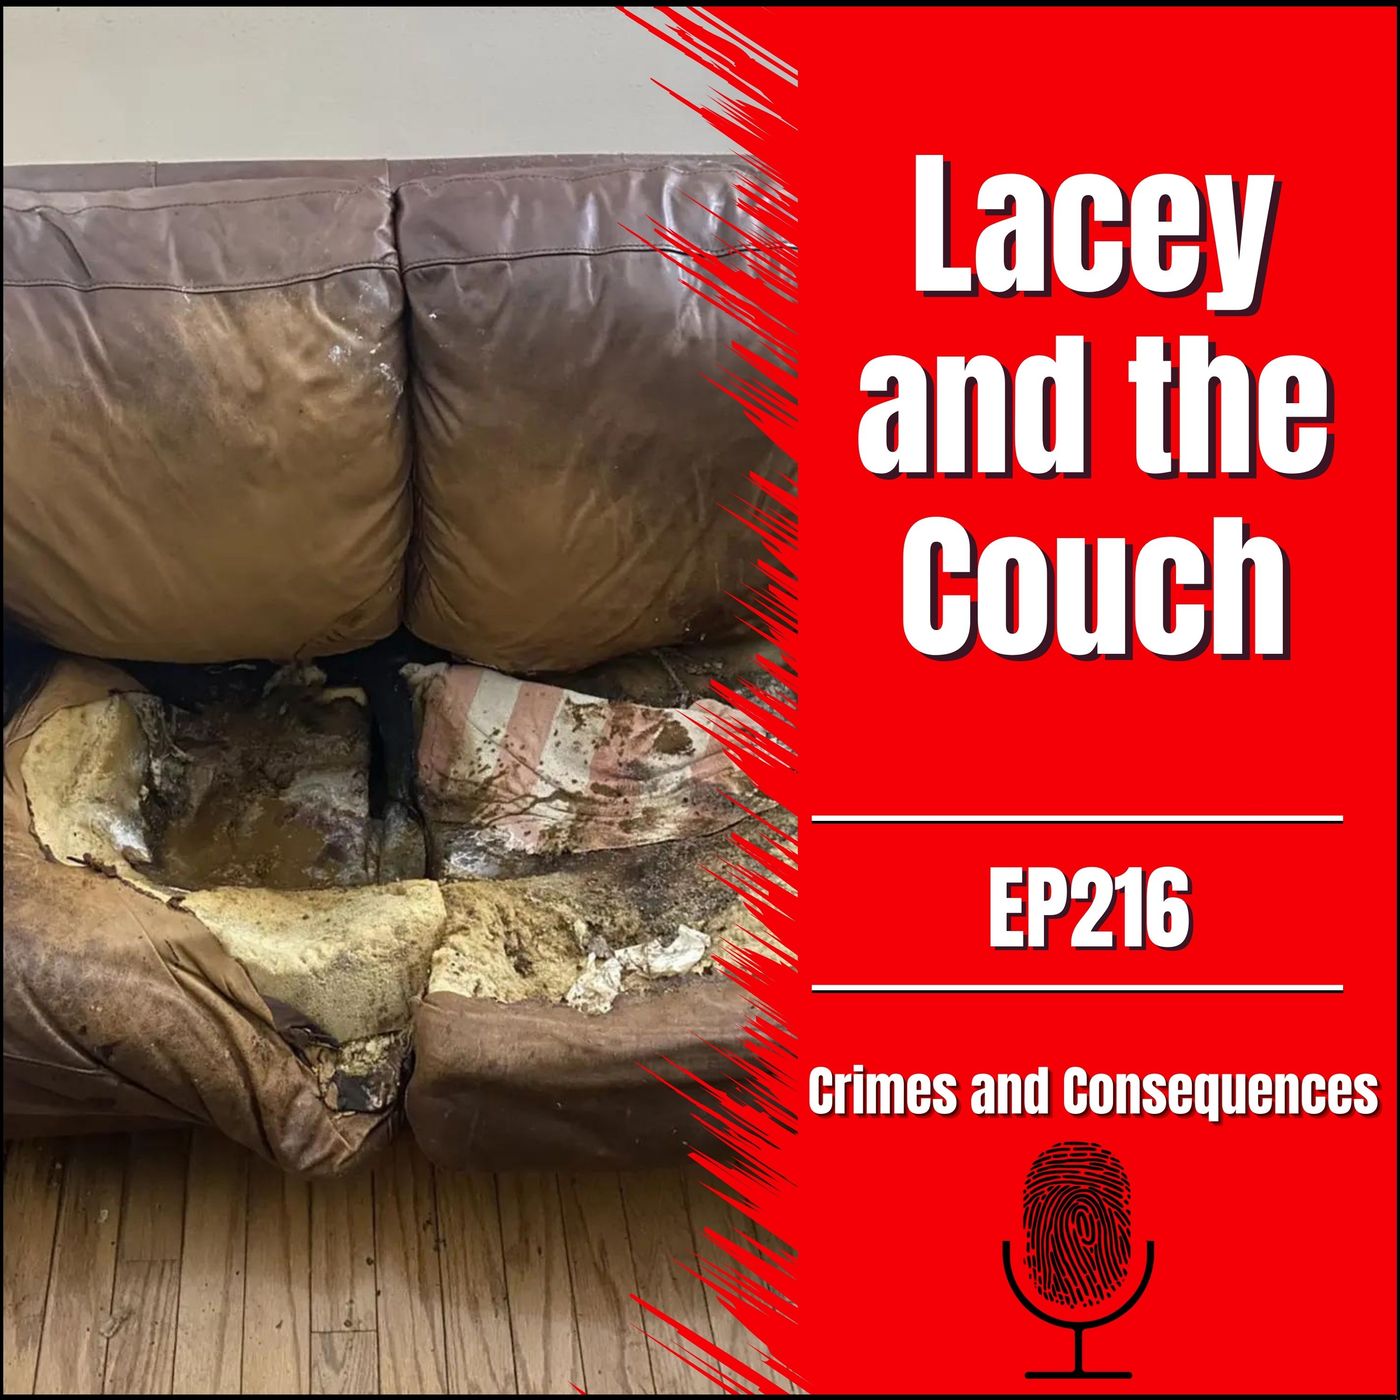 EP216: Lacey and the Couch